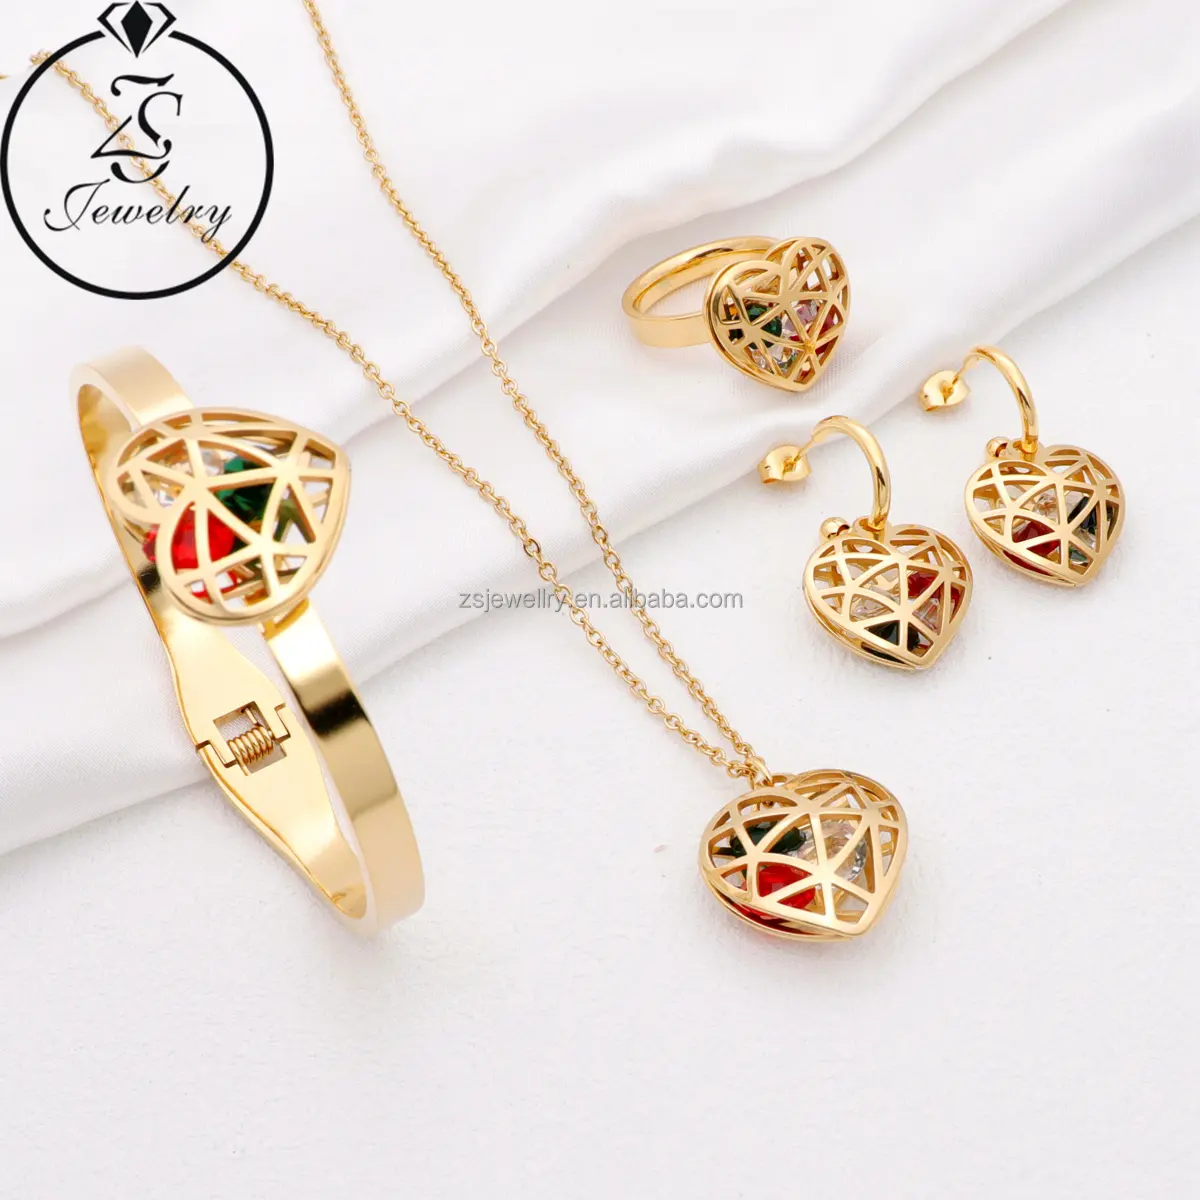 Laurent Gold Plated Luxury Stainless Steel Jewelry Love Athenaa Cute Geometric Stone Color Gemstone Bracelet Design Sets